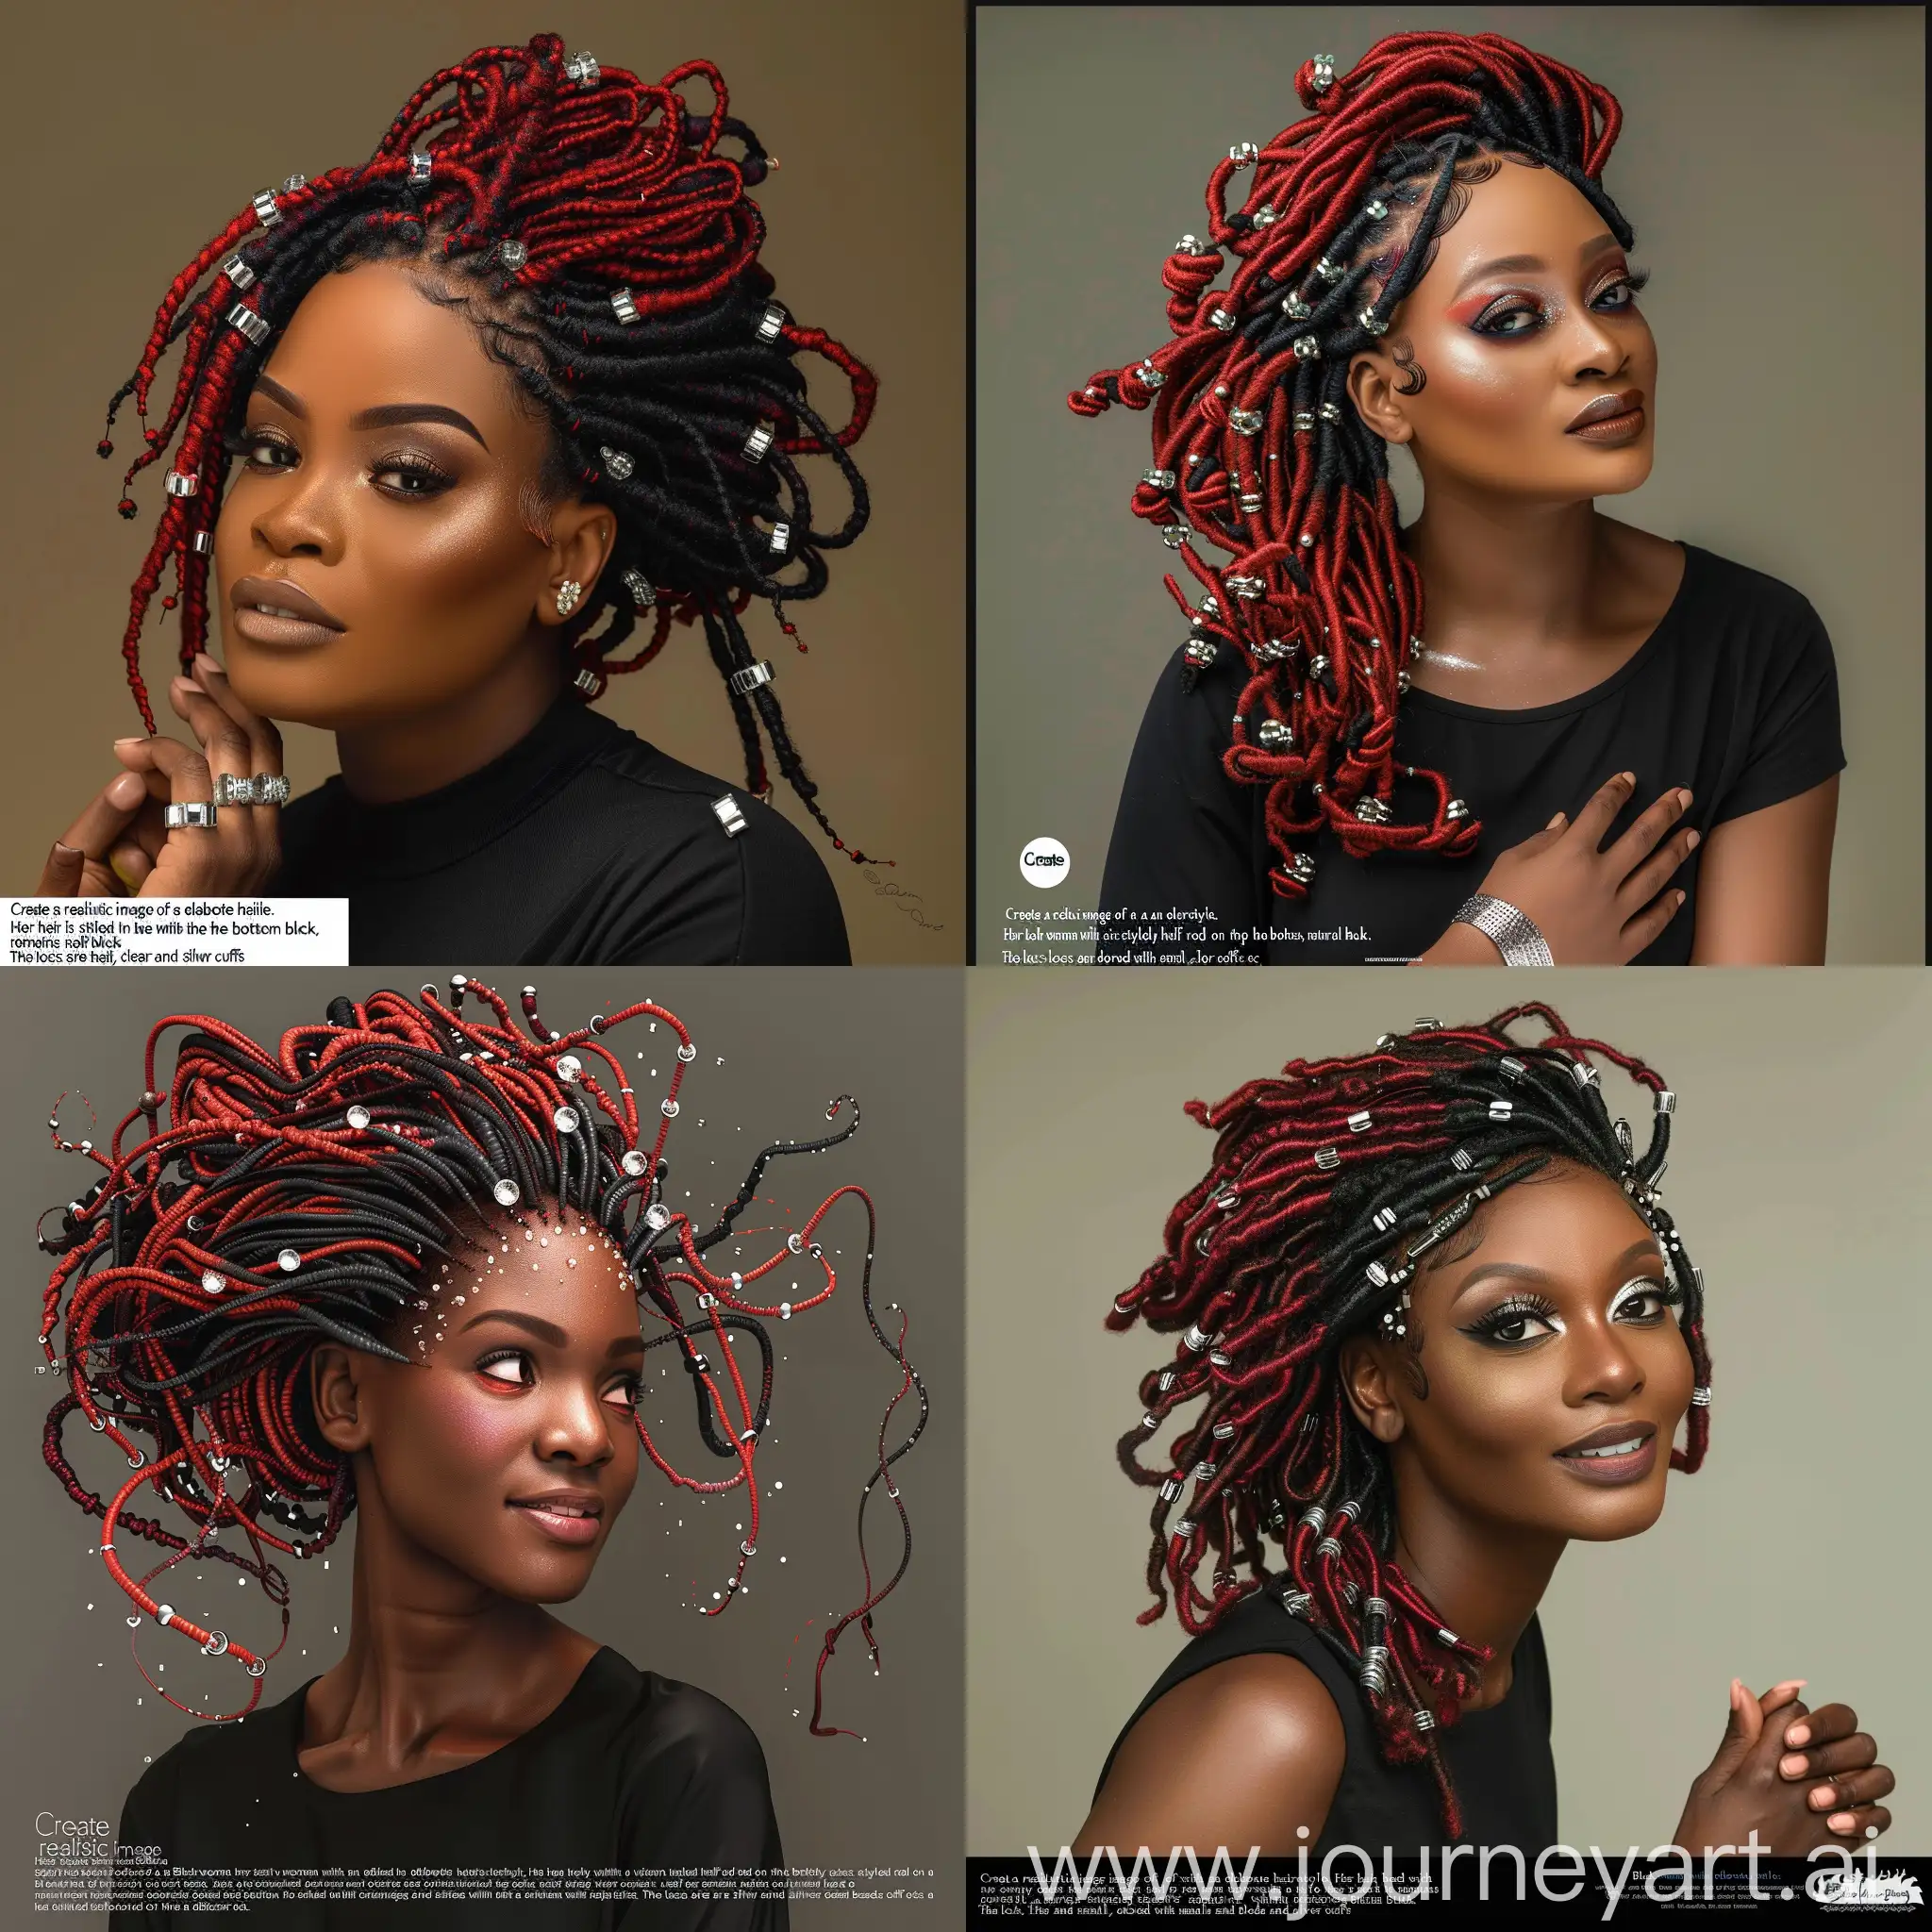 Elegant-Black-Woman-with-Vibrant-Red-Locs-and-Serene-Expression